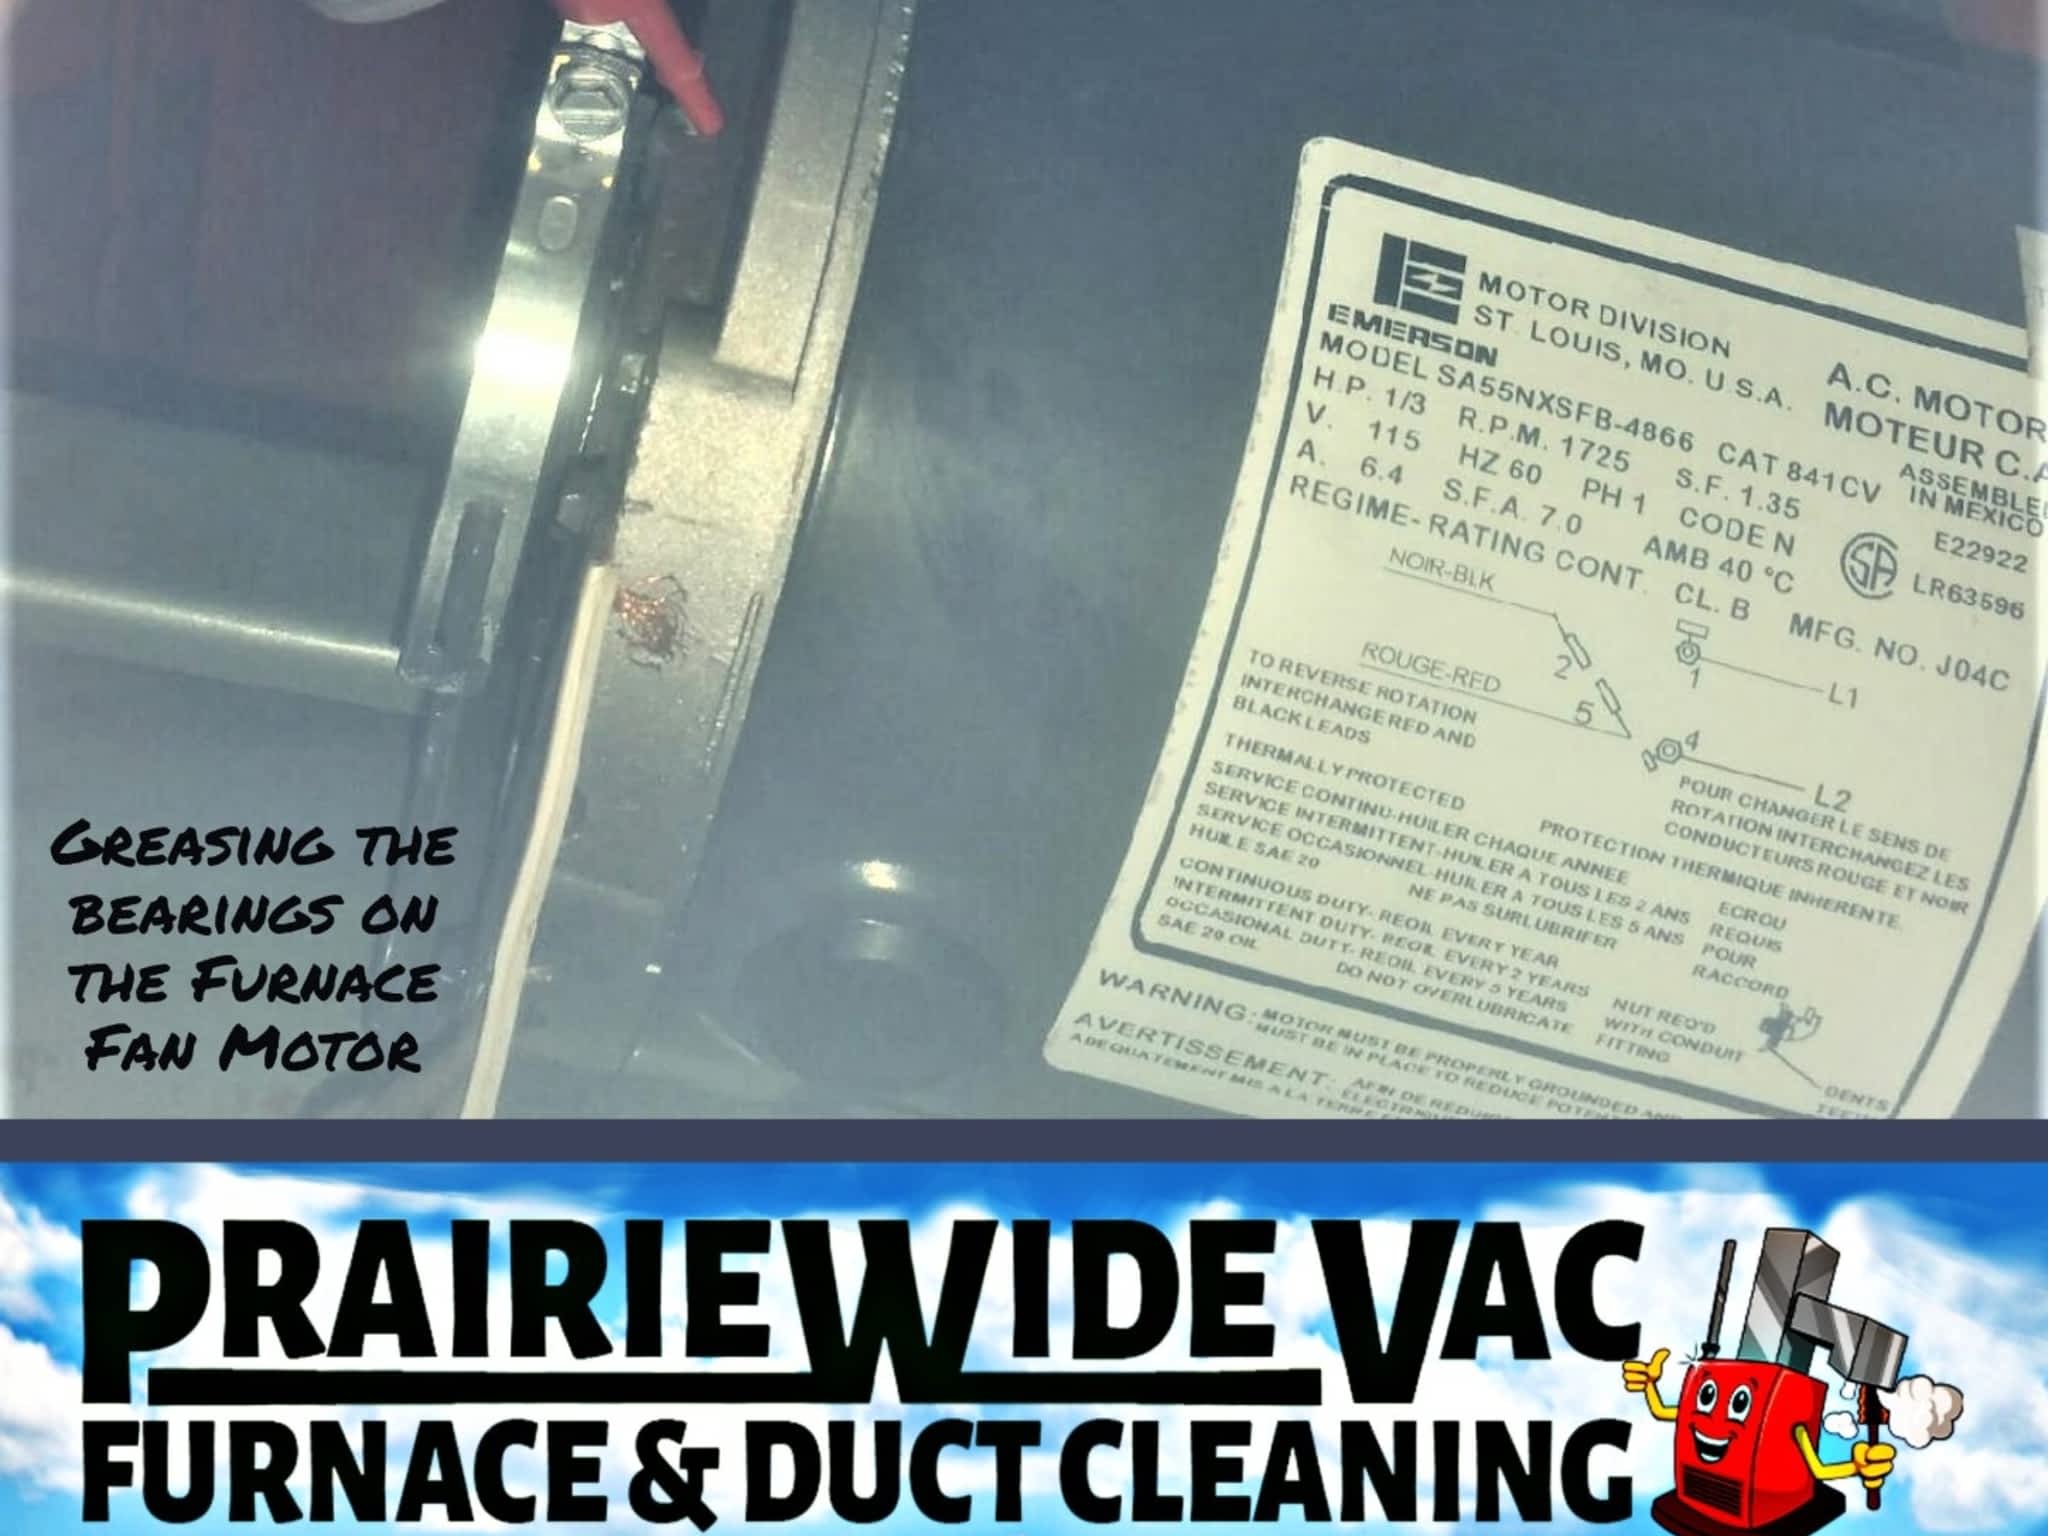 photo Prairiewide Vac Furnace & Duct Cleaning Services